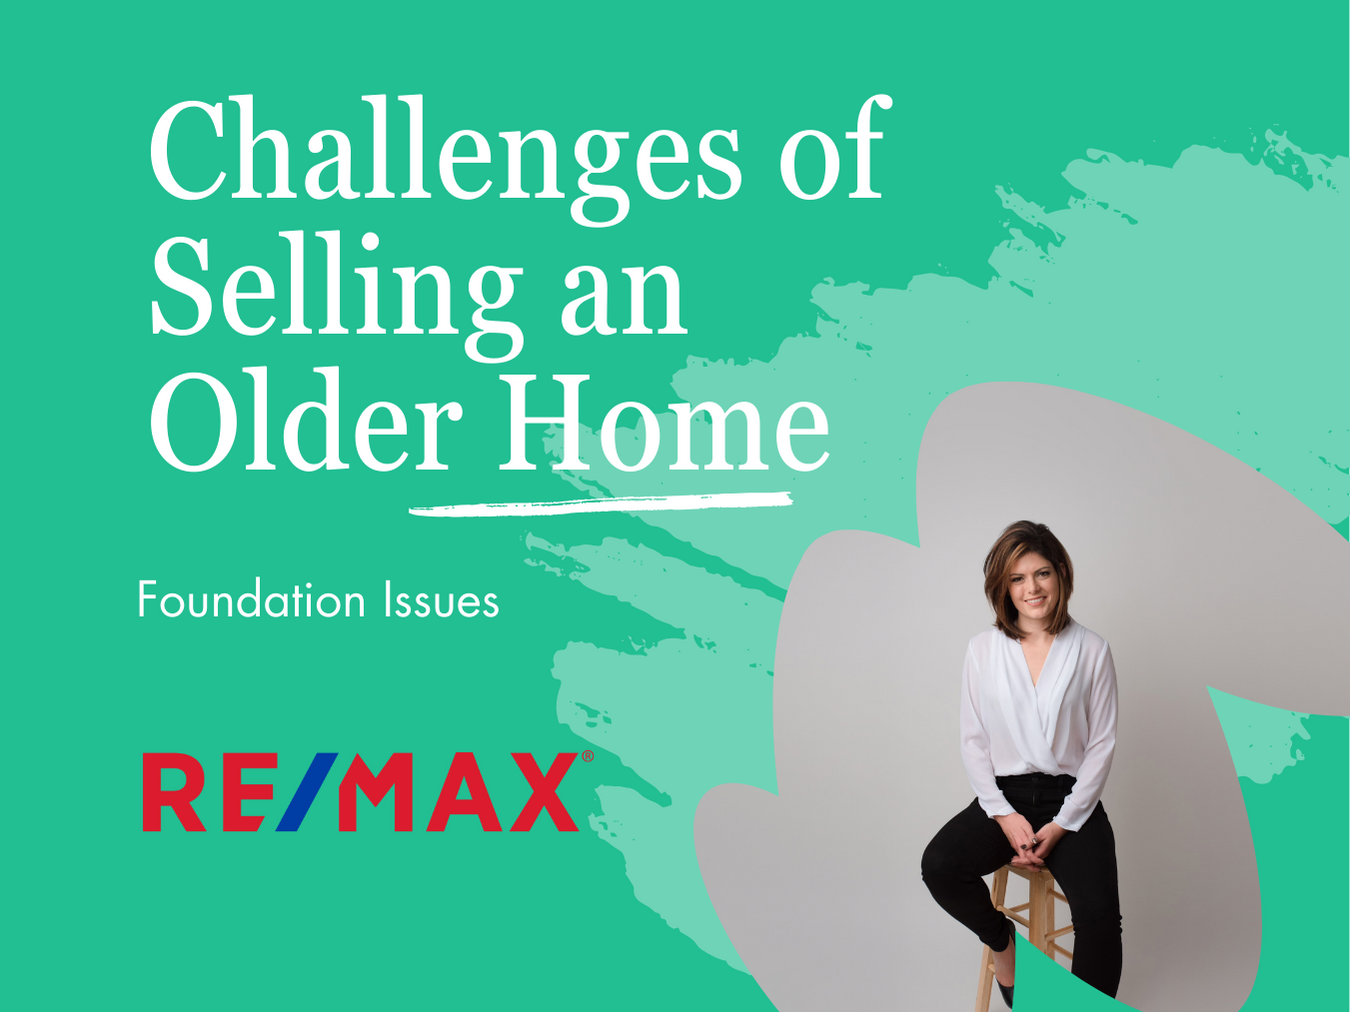 Challenges of Selling an Older Home in Regina: Turning Foundation Issues into Opportunities